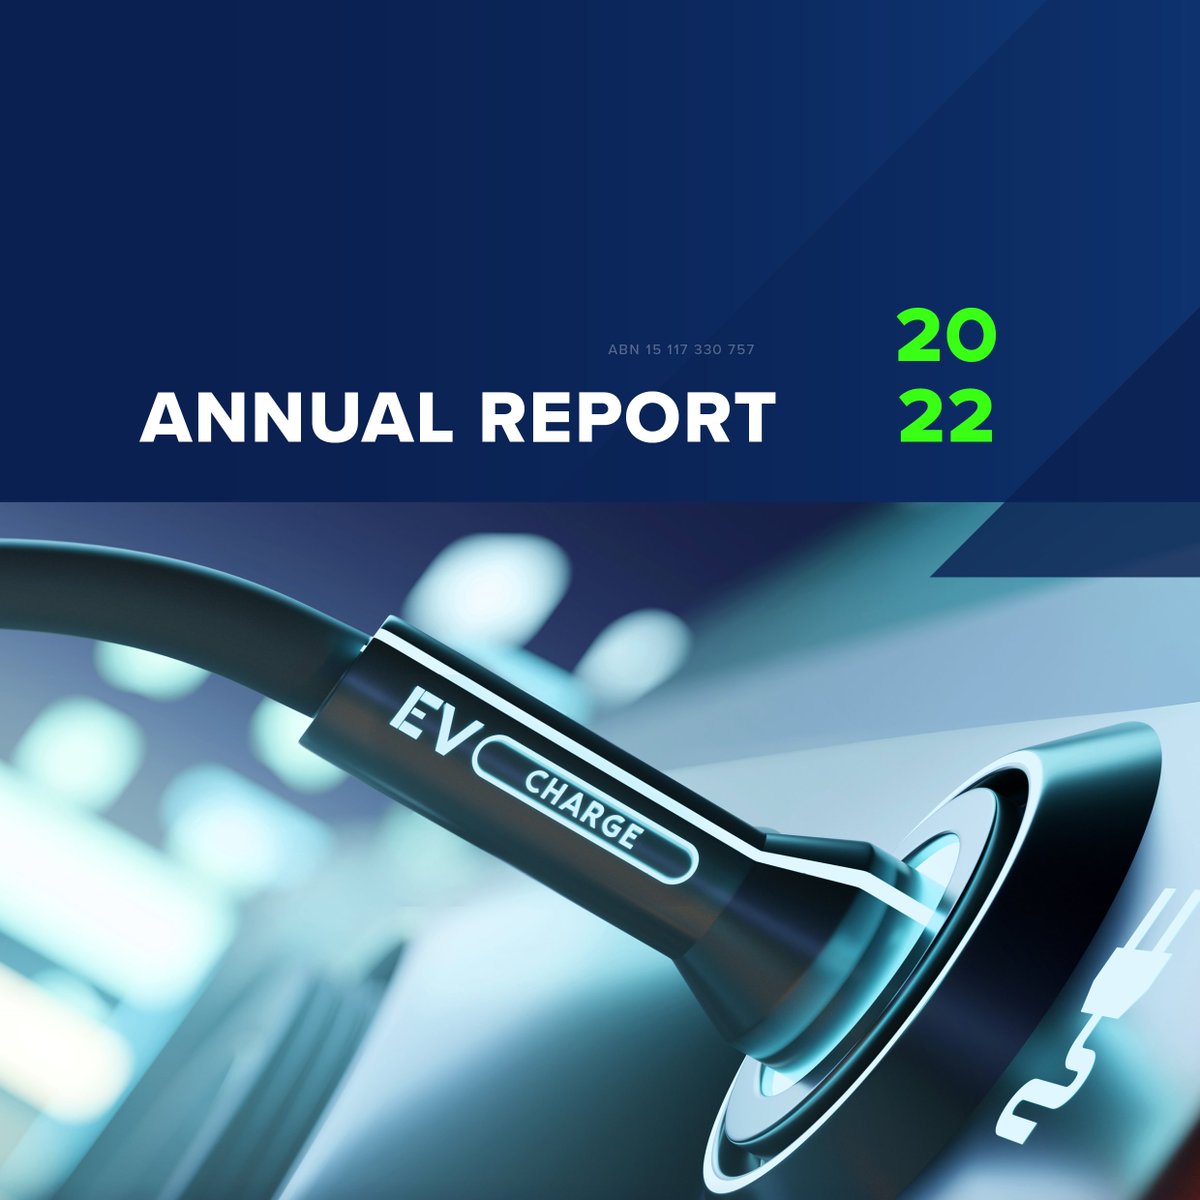 #EcoGraf Annual Report 2022. Read Report: bit.ly/3y4ymIX

ASX: $EGR FSE: $FMK OTCQX: $ECGFF 

#ExtractUpgradeRecycle #HFfree #TanzGraphite #BatteryAnodeMaterial #LithiumionBatteryRecycling